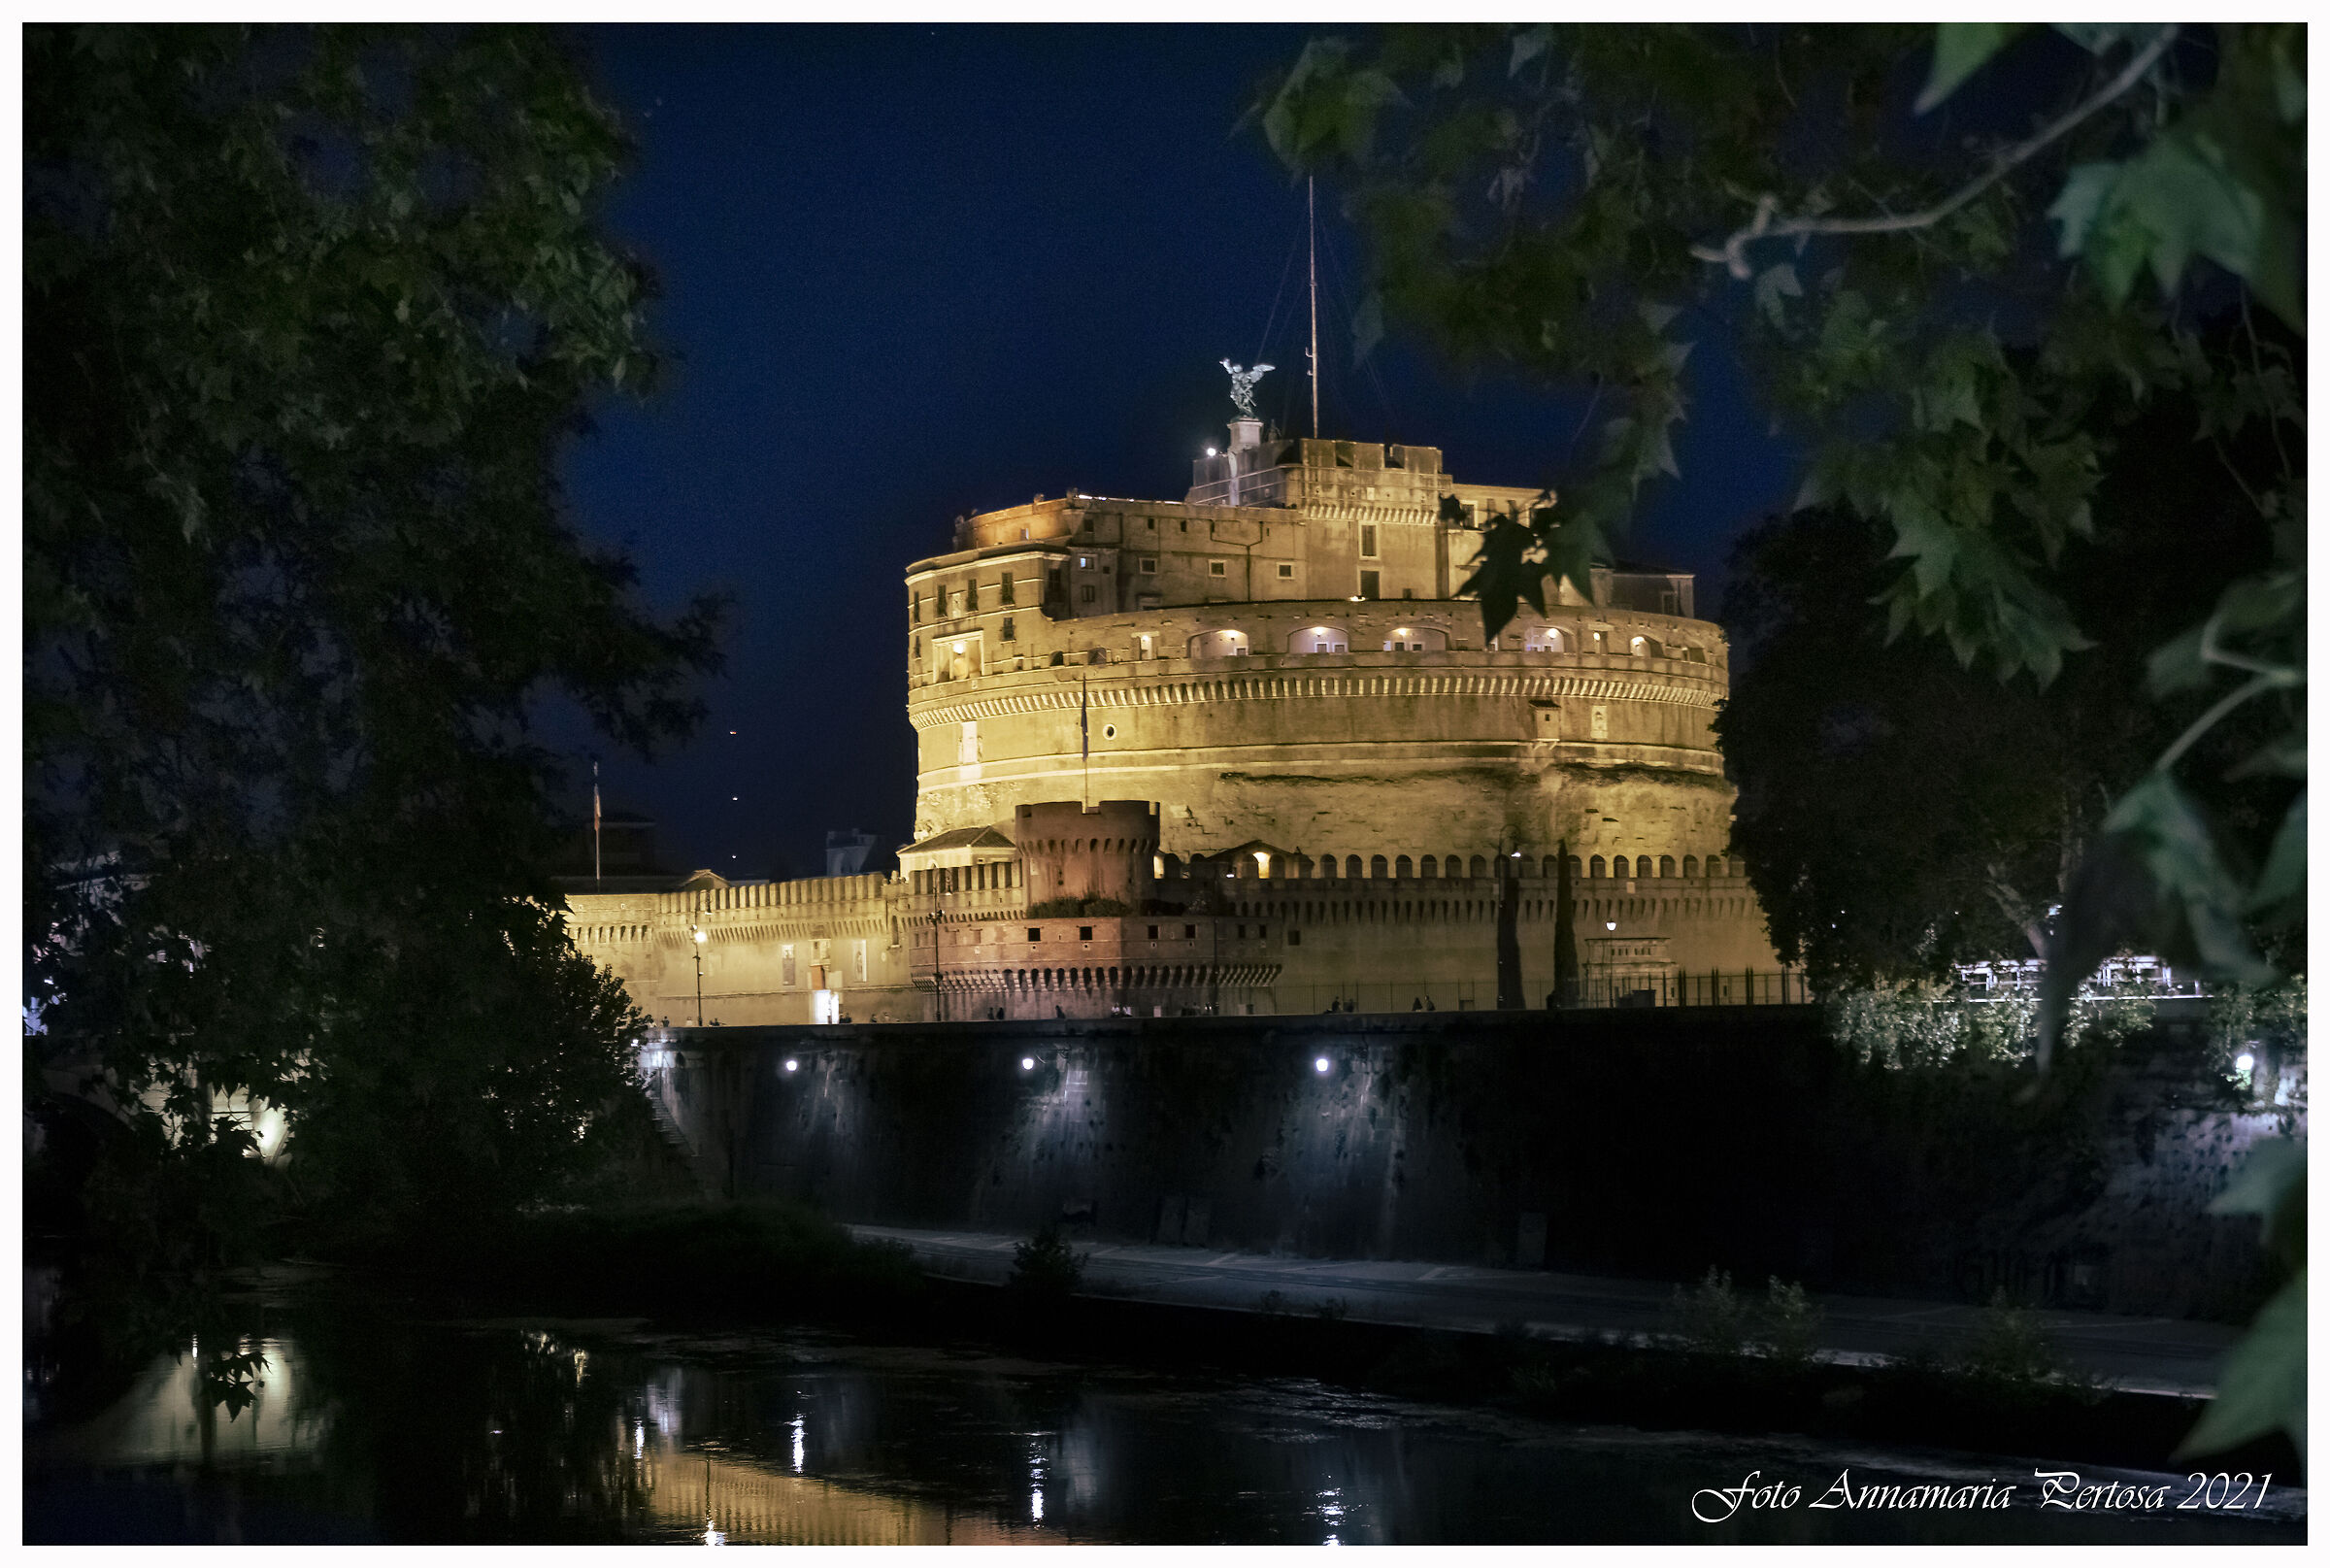 Castel Sant'Angelo over the centuries...